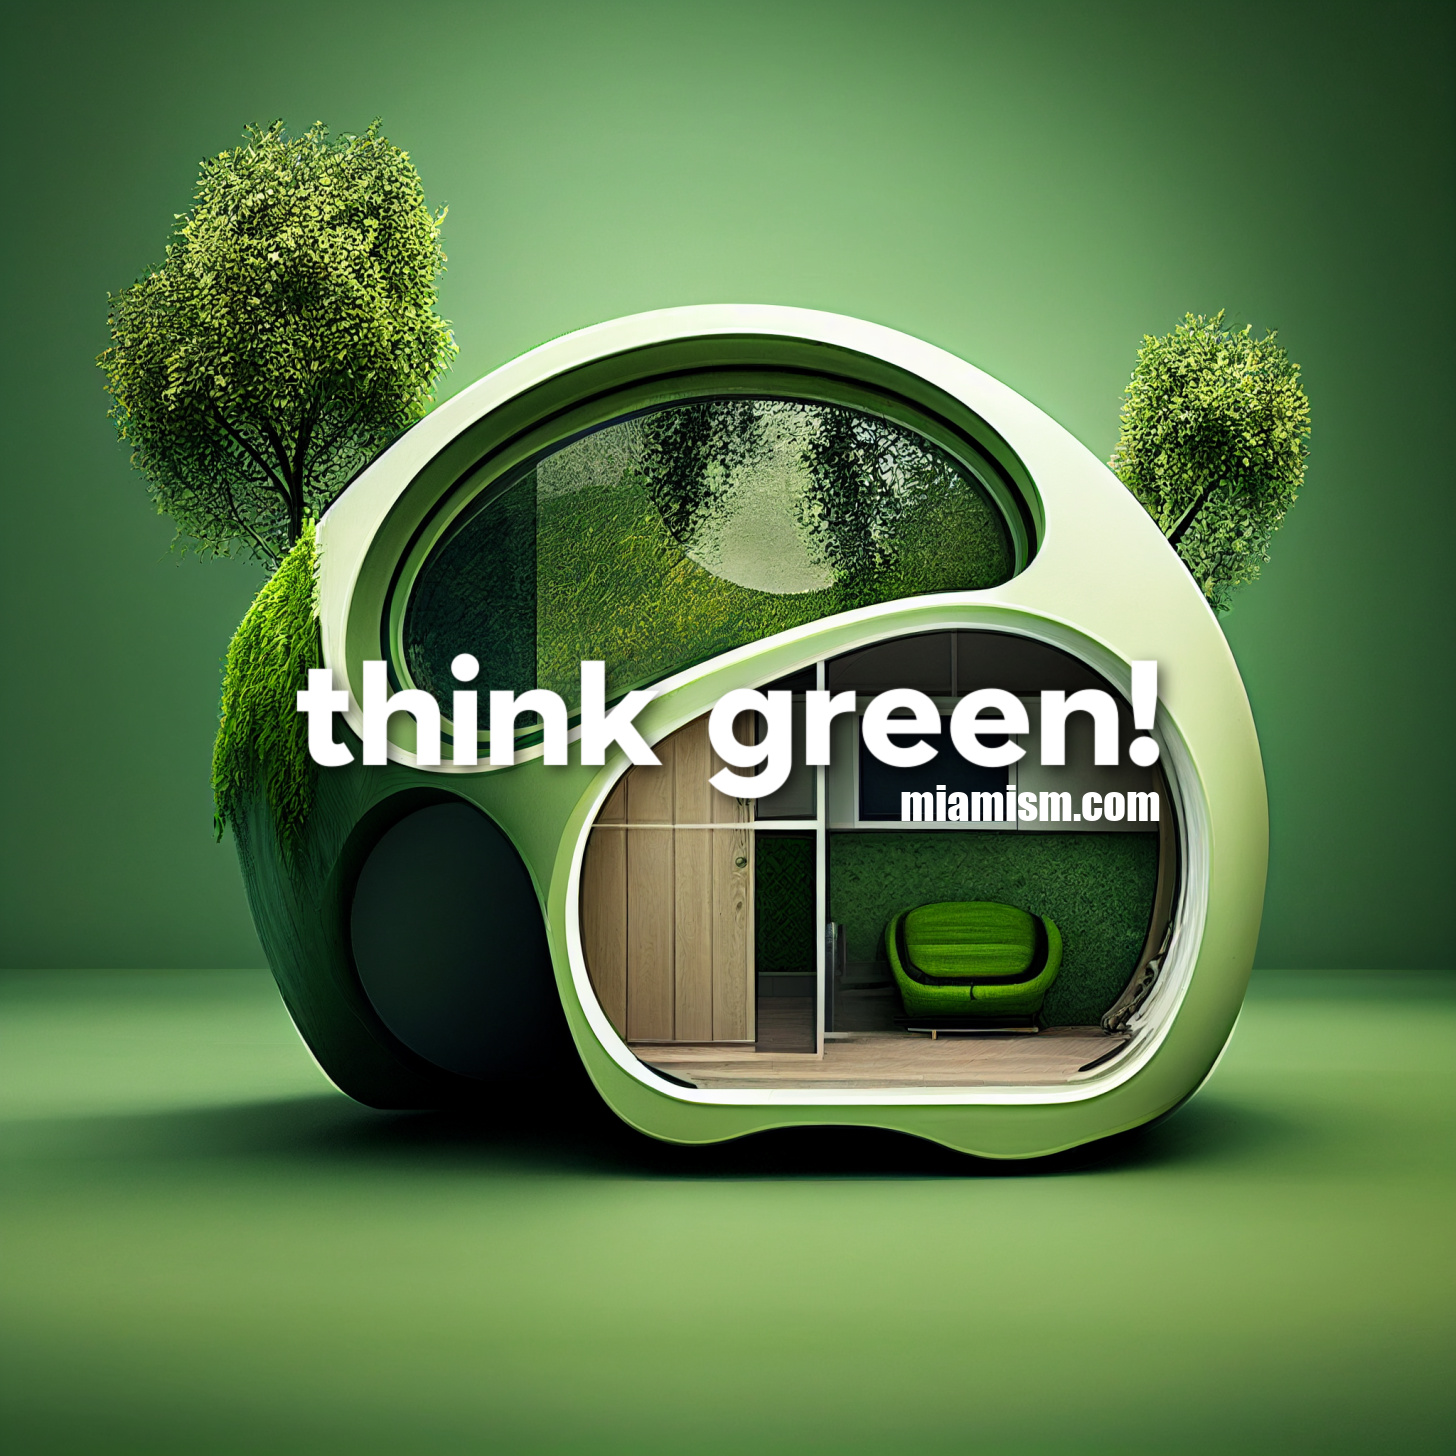 miamism image that shows green-conscious home design